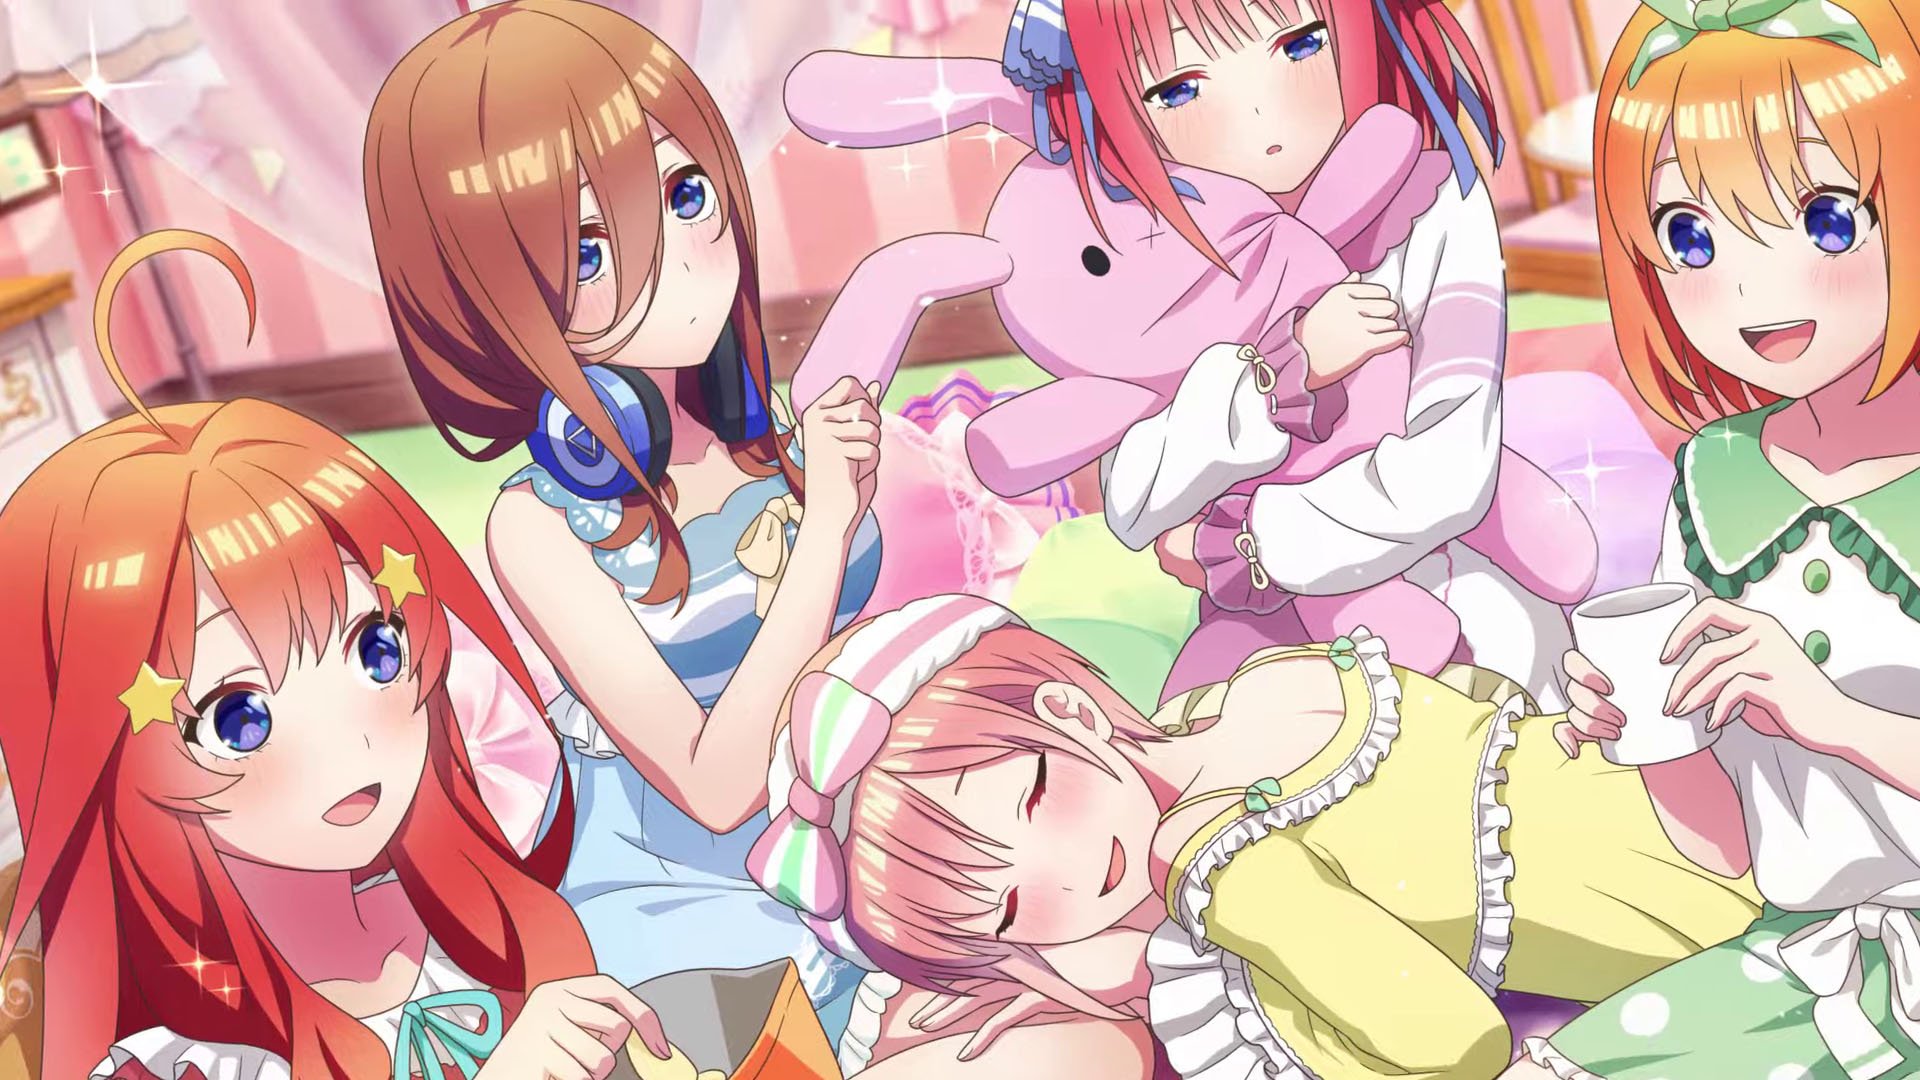 New The Quintessential Quintuplets Game Locks in Release Date